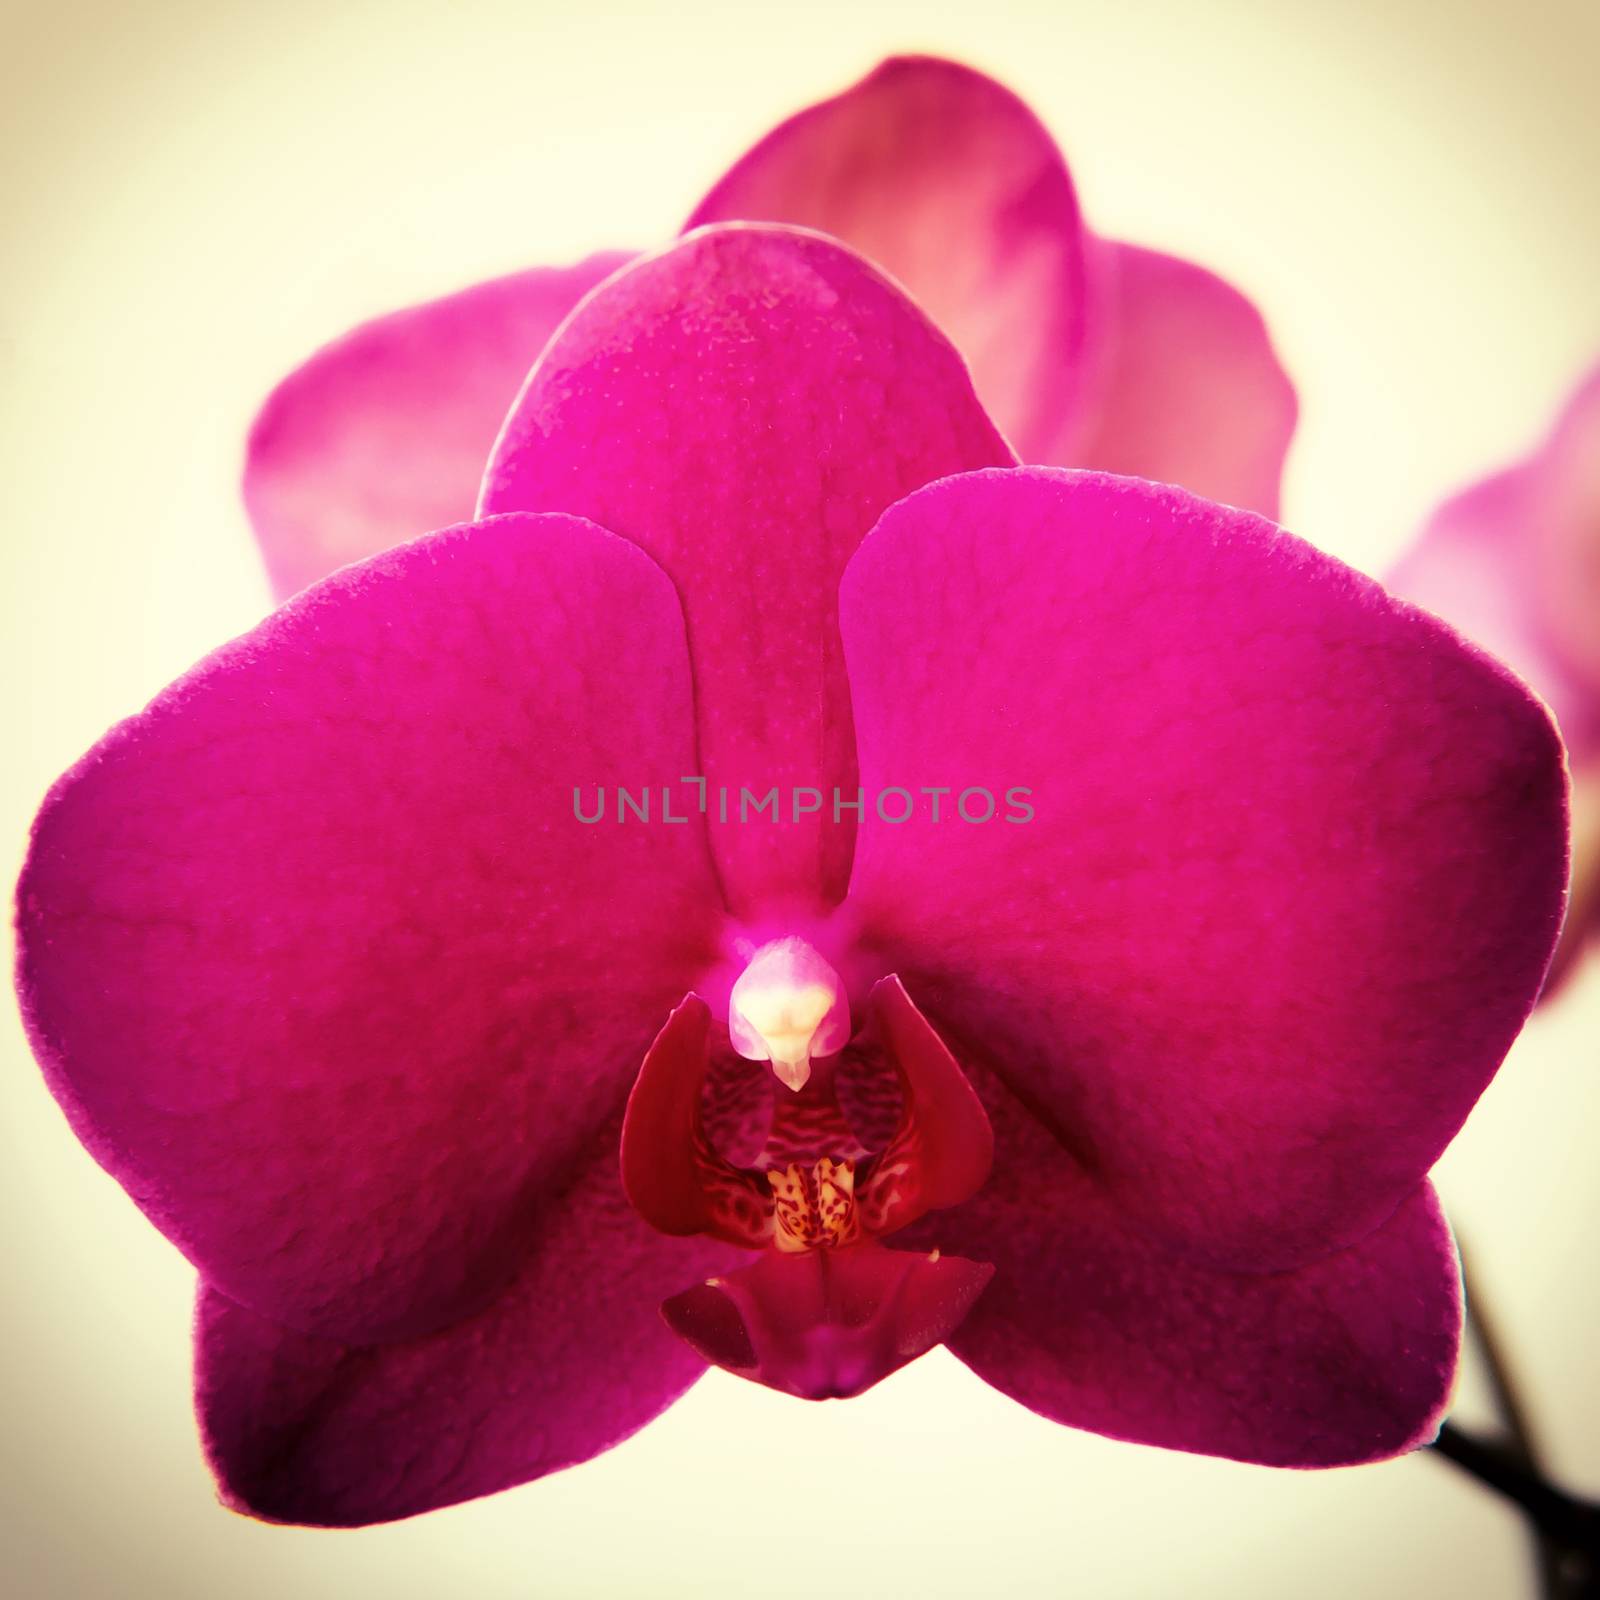 Flower of pink orchid phalaenopsis on a light background close-up, square, for the Instragram